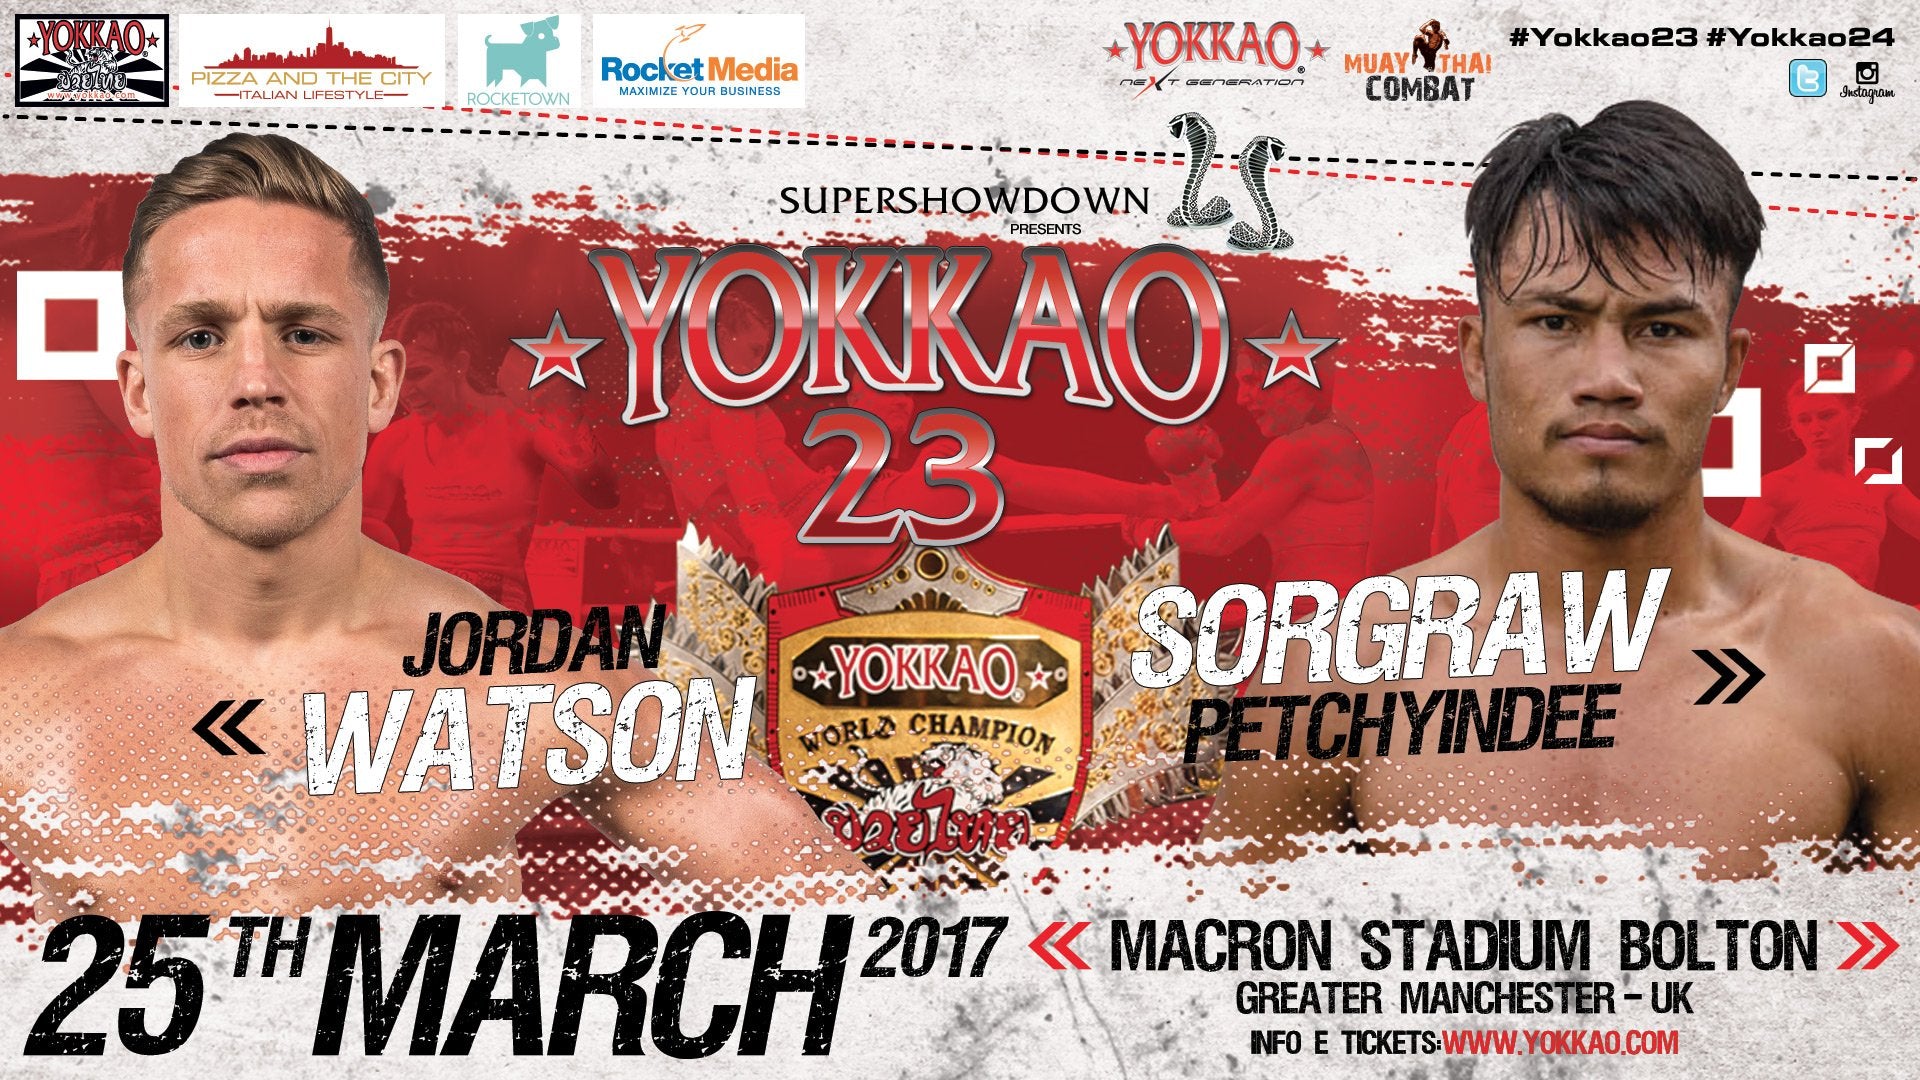 Jordan Watson to defend the World Title against Sorgraw Petchyindee!